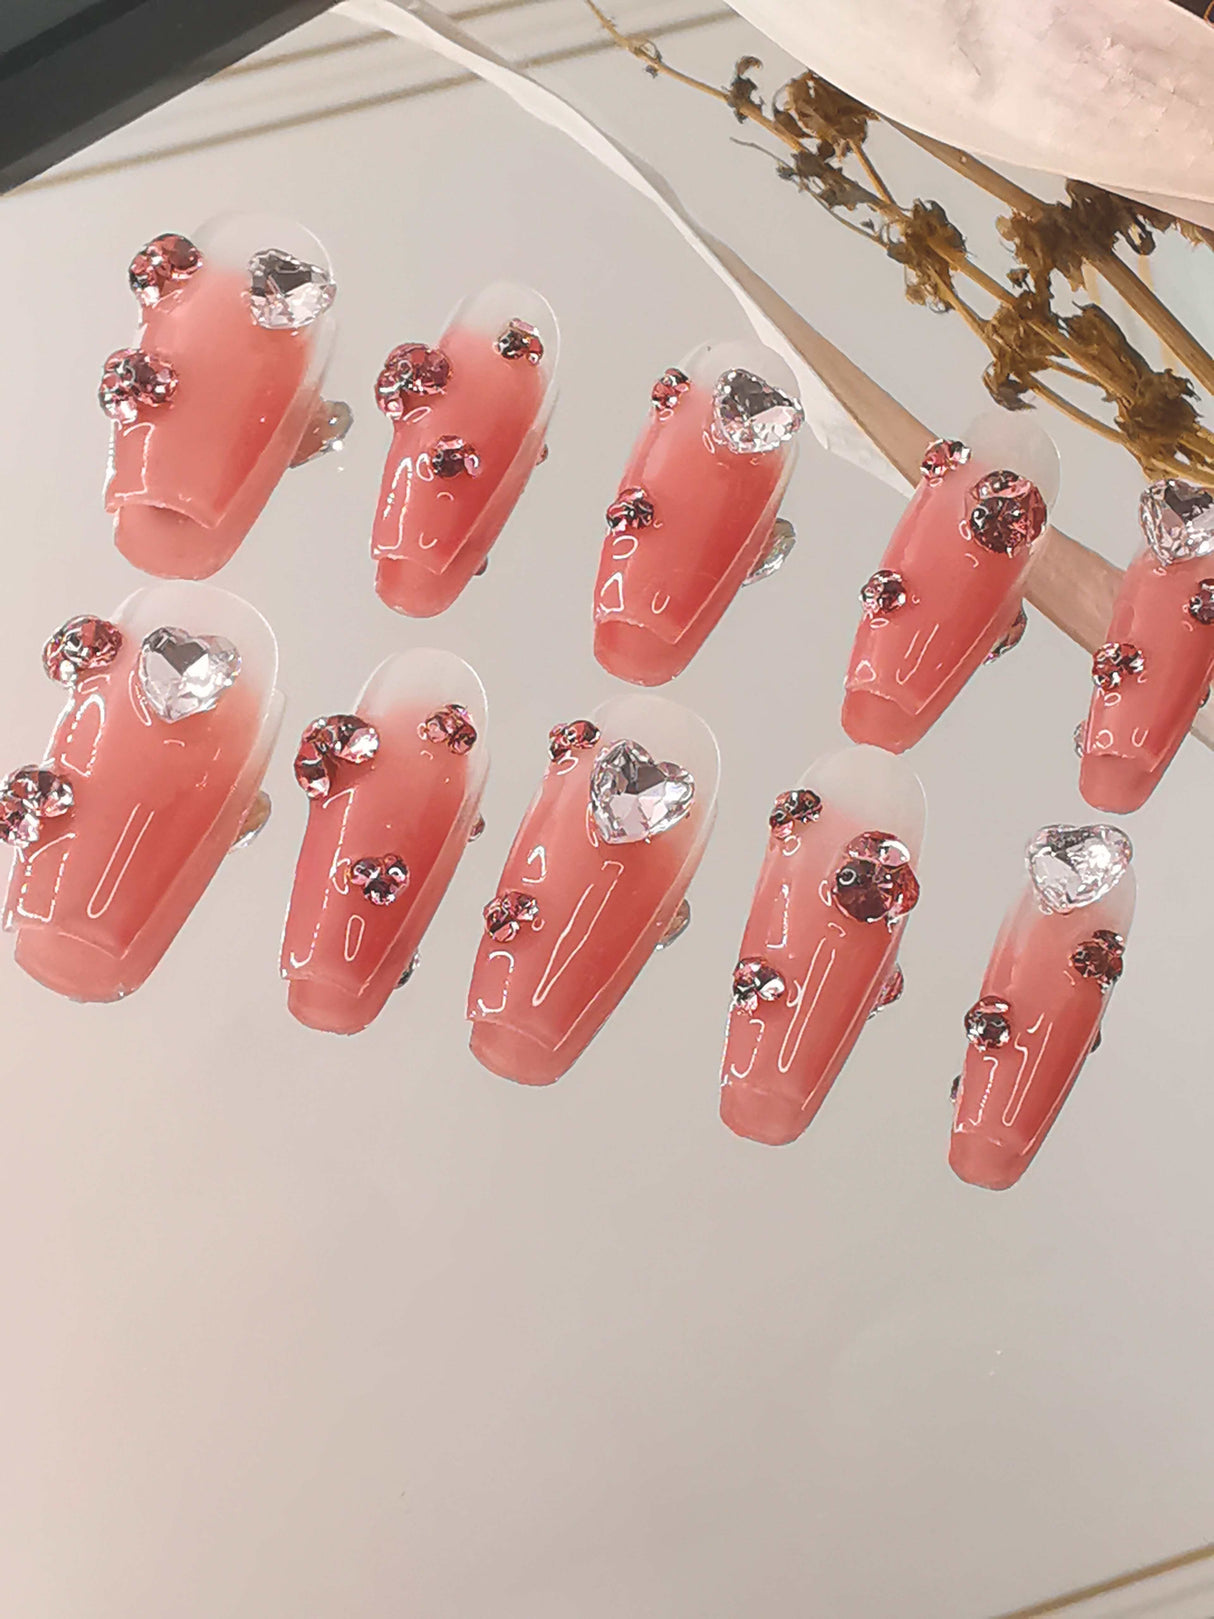 Glamorous and statement-making nails for special occasions with pink ombre effect, large rhinestones, scattered smaller ones, glossy finish, and coffin/ballerina shape.